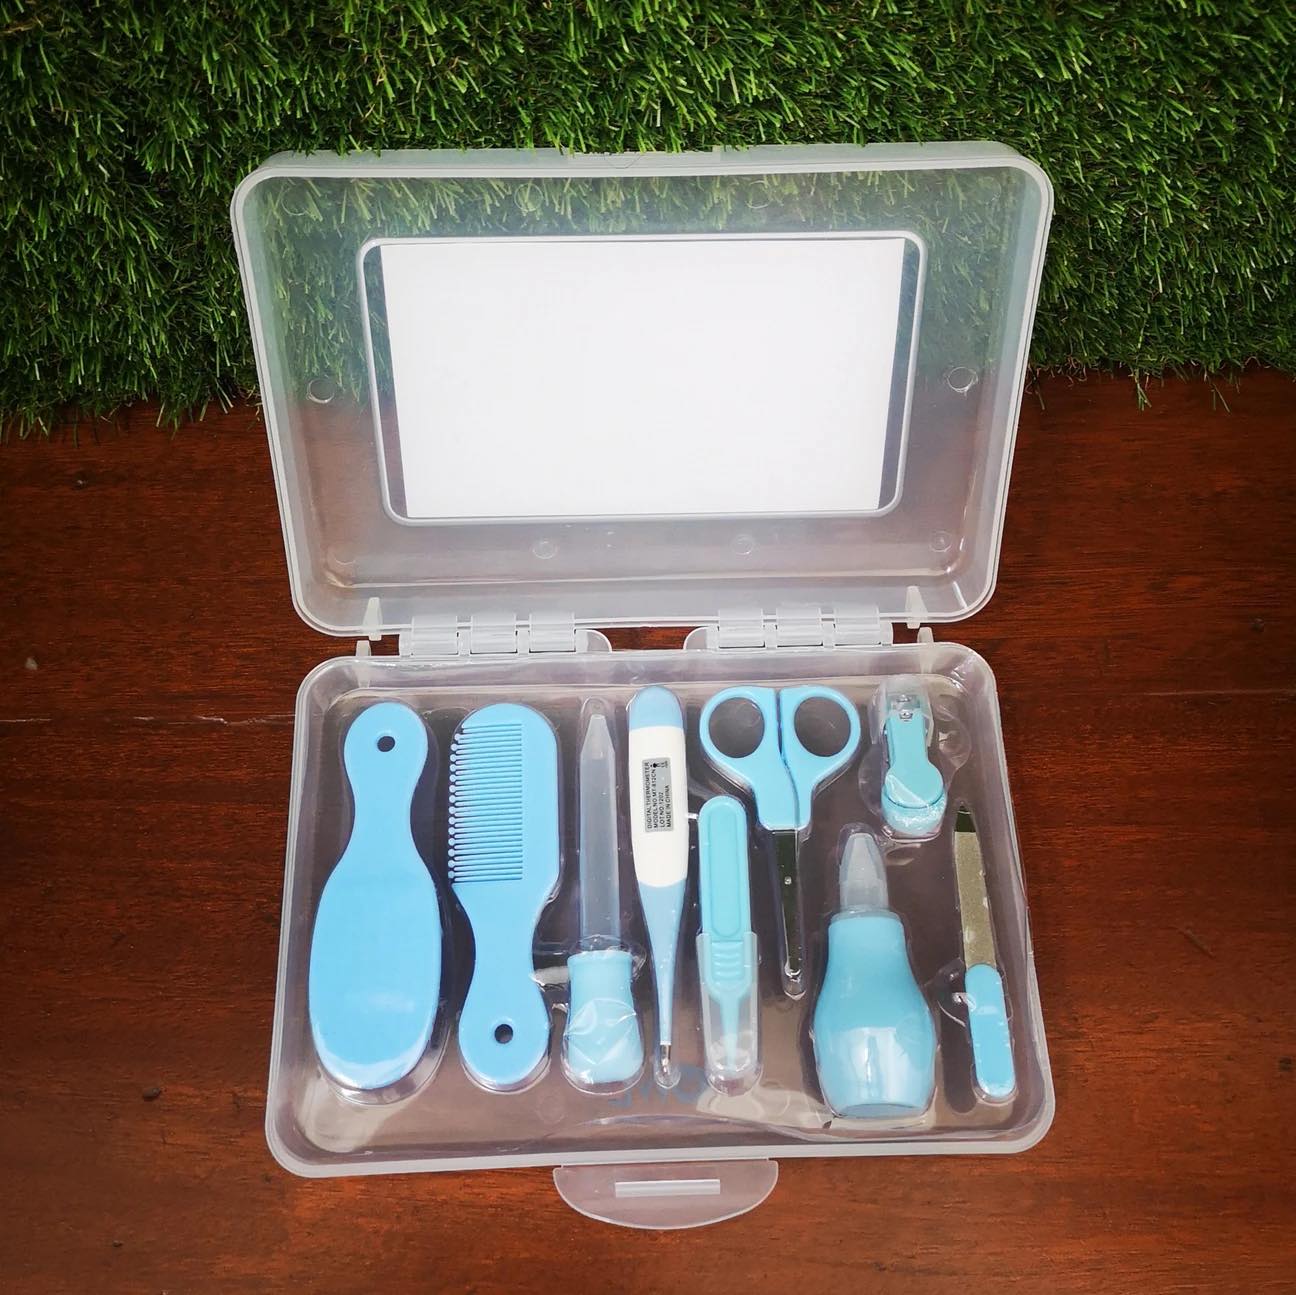 Owl Baby 10 in 1 Grooming and Health Care Essentials Kit with Travel Case